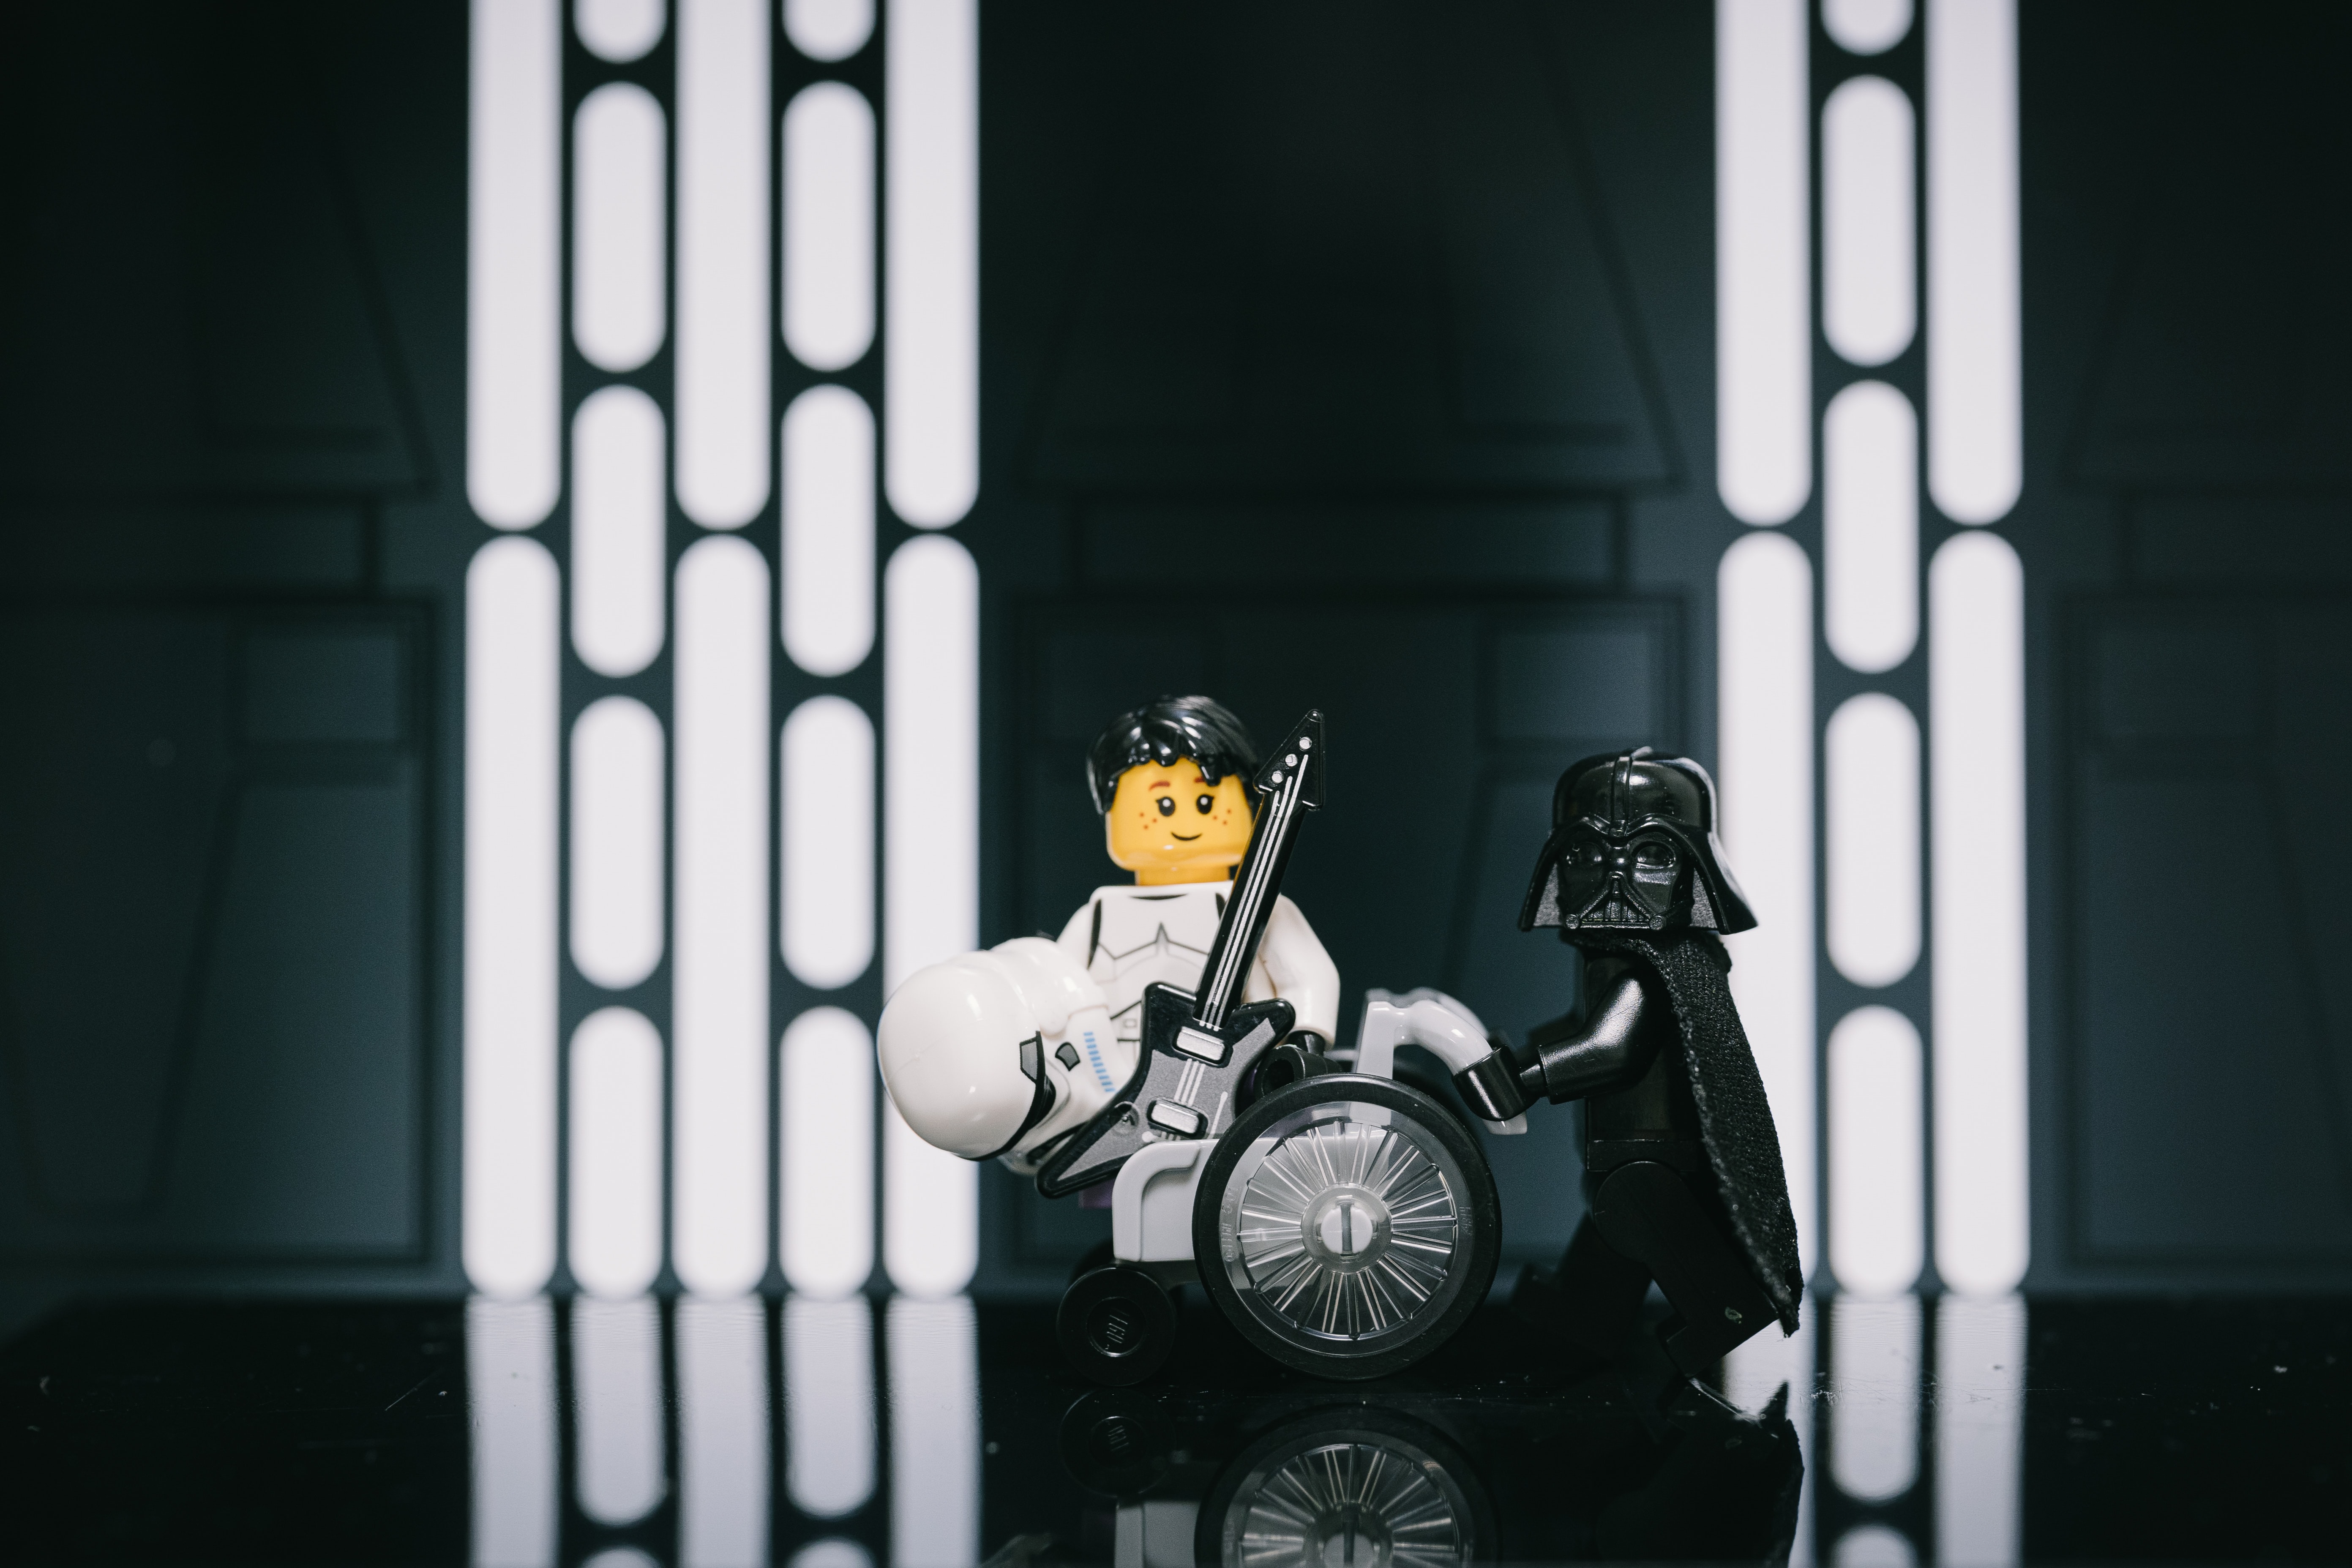 Lego Darth Vader and Han Solo dressed as a storm trooper hang out